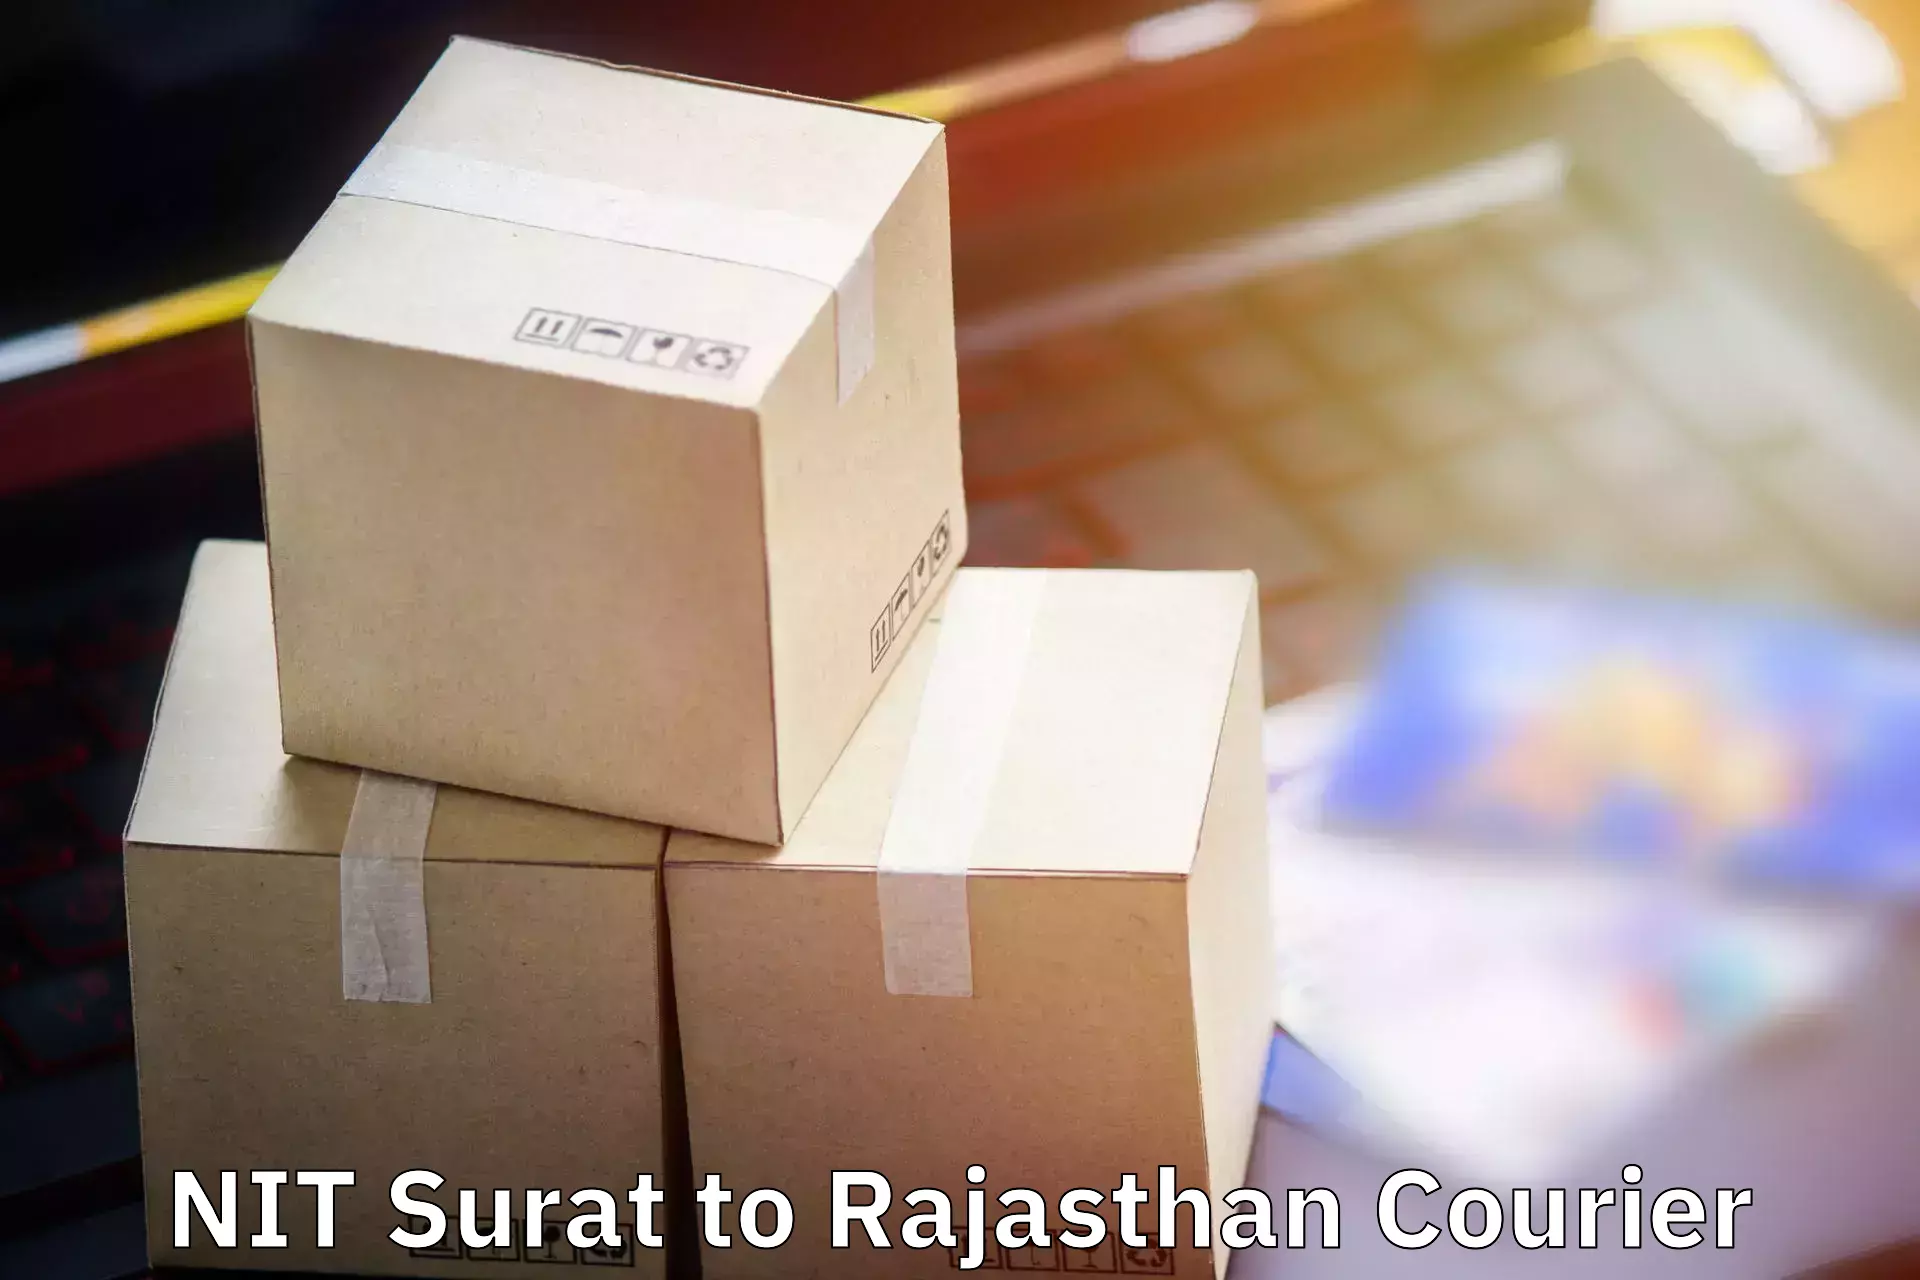 Personal effects shipping NIT Surat to Udaipur